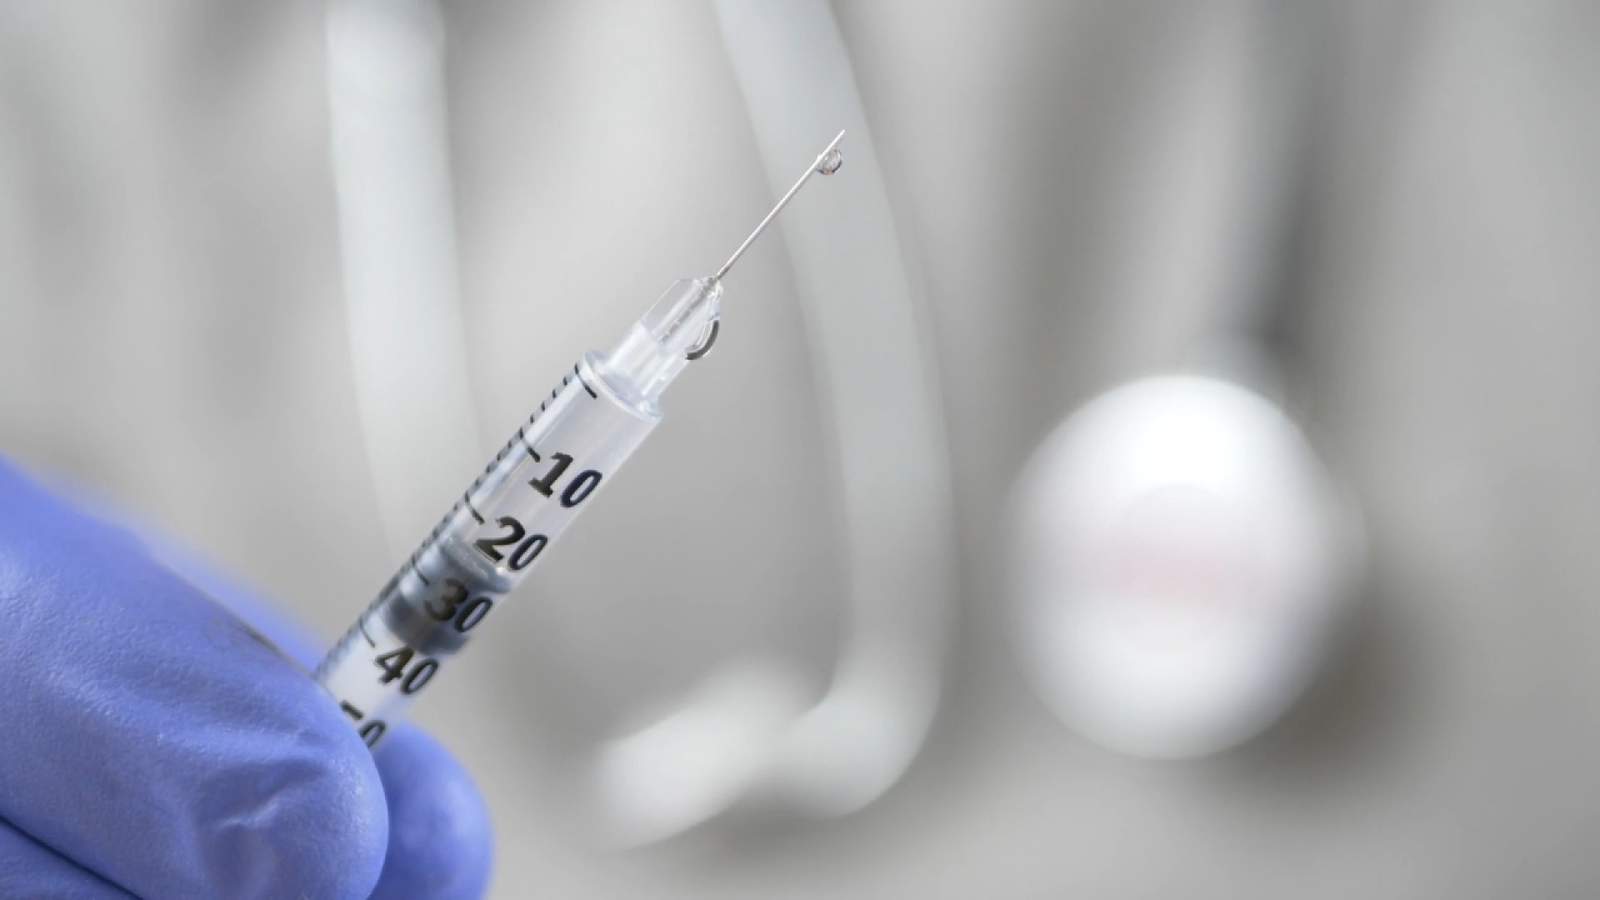 Don’t fall for fake vaccine scams, FBI warns